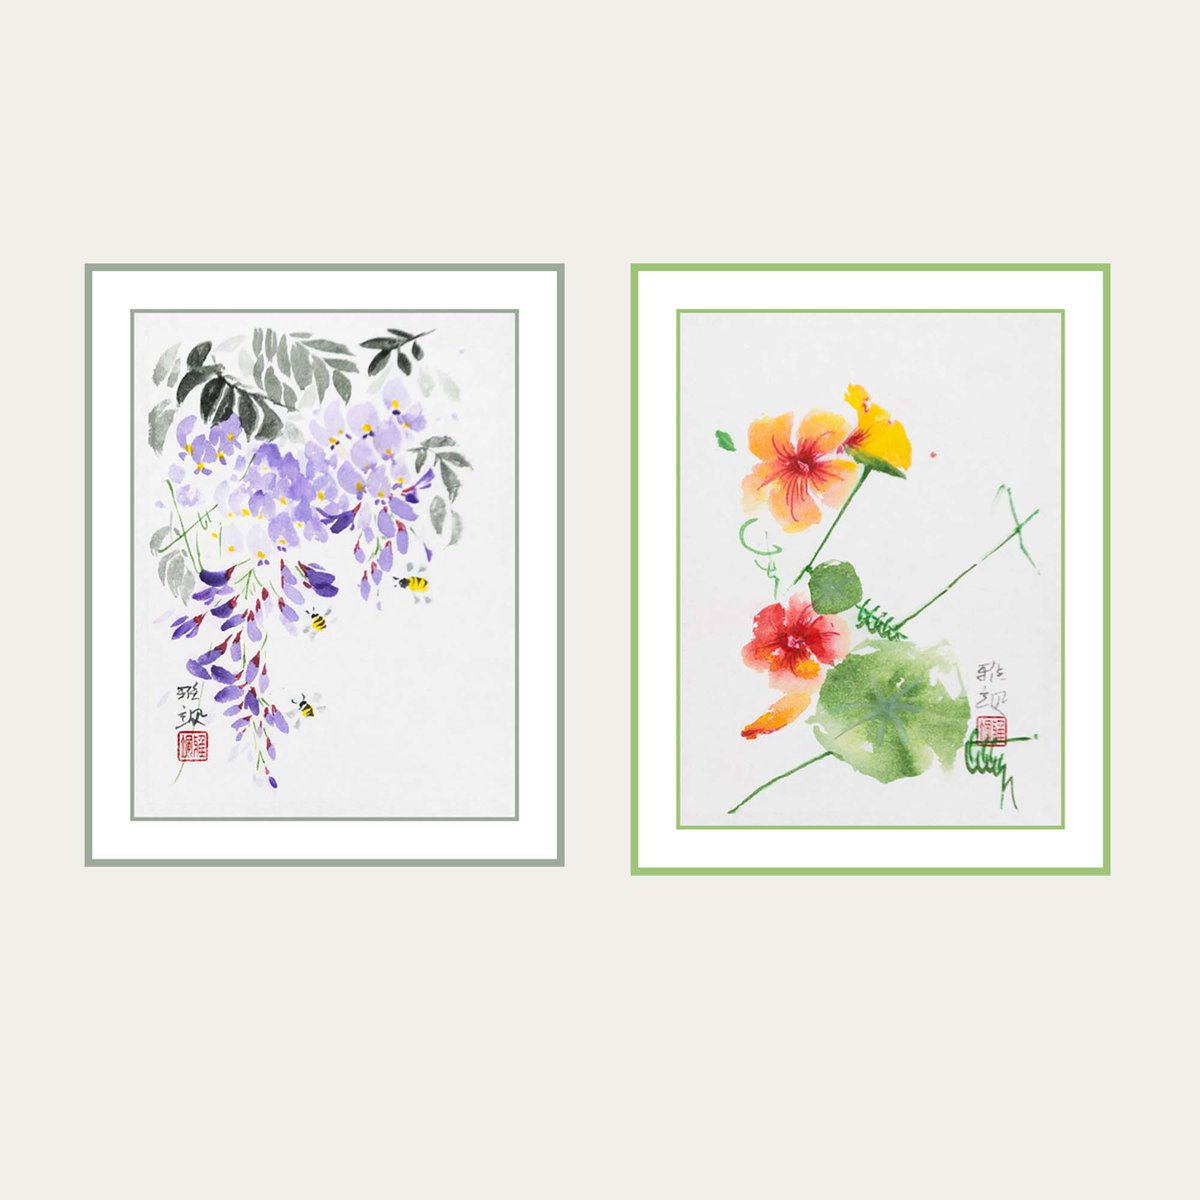 New in my shop: #summerflowers, #wisteria  and #nasturtium. Ink and watercolours on rice paper. #sumie #sumiartist #canadianartist #bokusaiga #japaneseart #suibokuga 

yasamt.etsy.com/listing/172955…